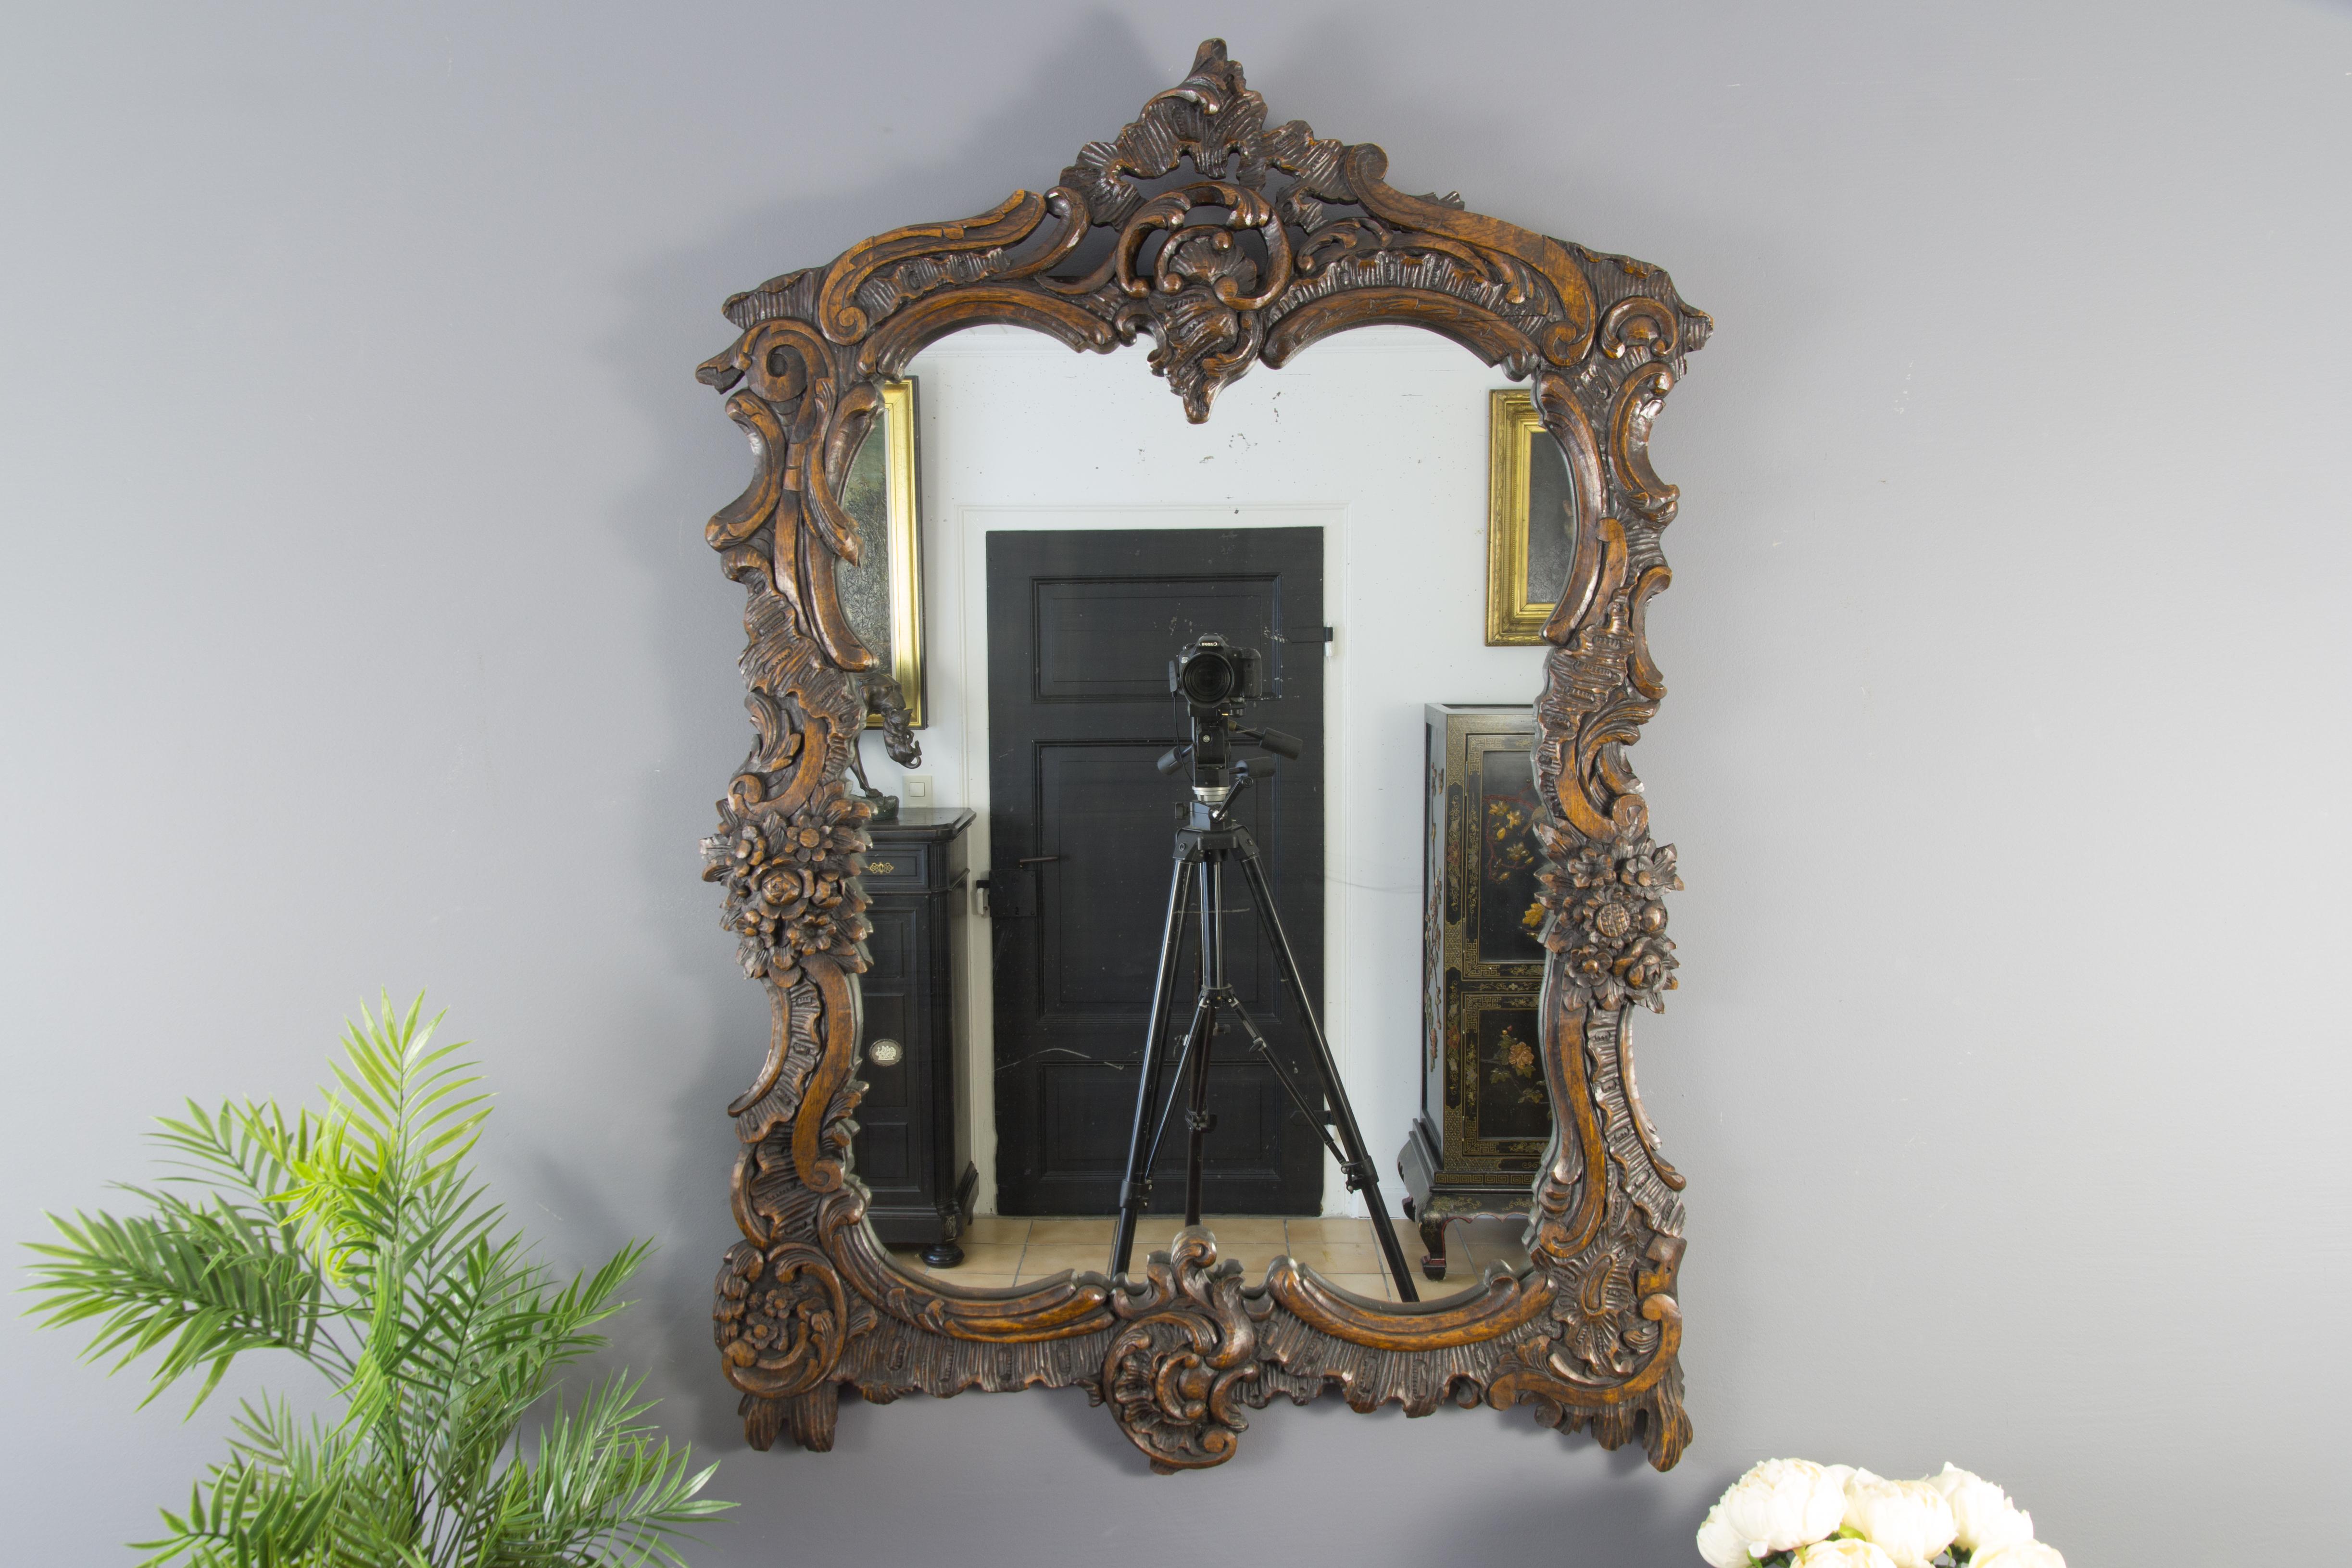 Beautiful large French Rococo or Louis XV style hand carved wood wall mirror, richly ornate carvings with C scroll, rocaille and floral motifs, early 20th century.
Dimensions: Height 118 cm / 46.45 in, width 83 cm / 32.67 in, depth 3 cm / 1.18 in.